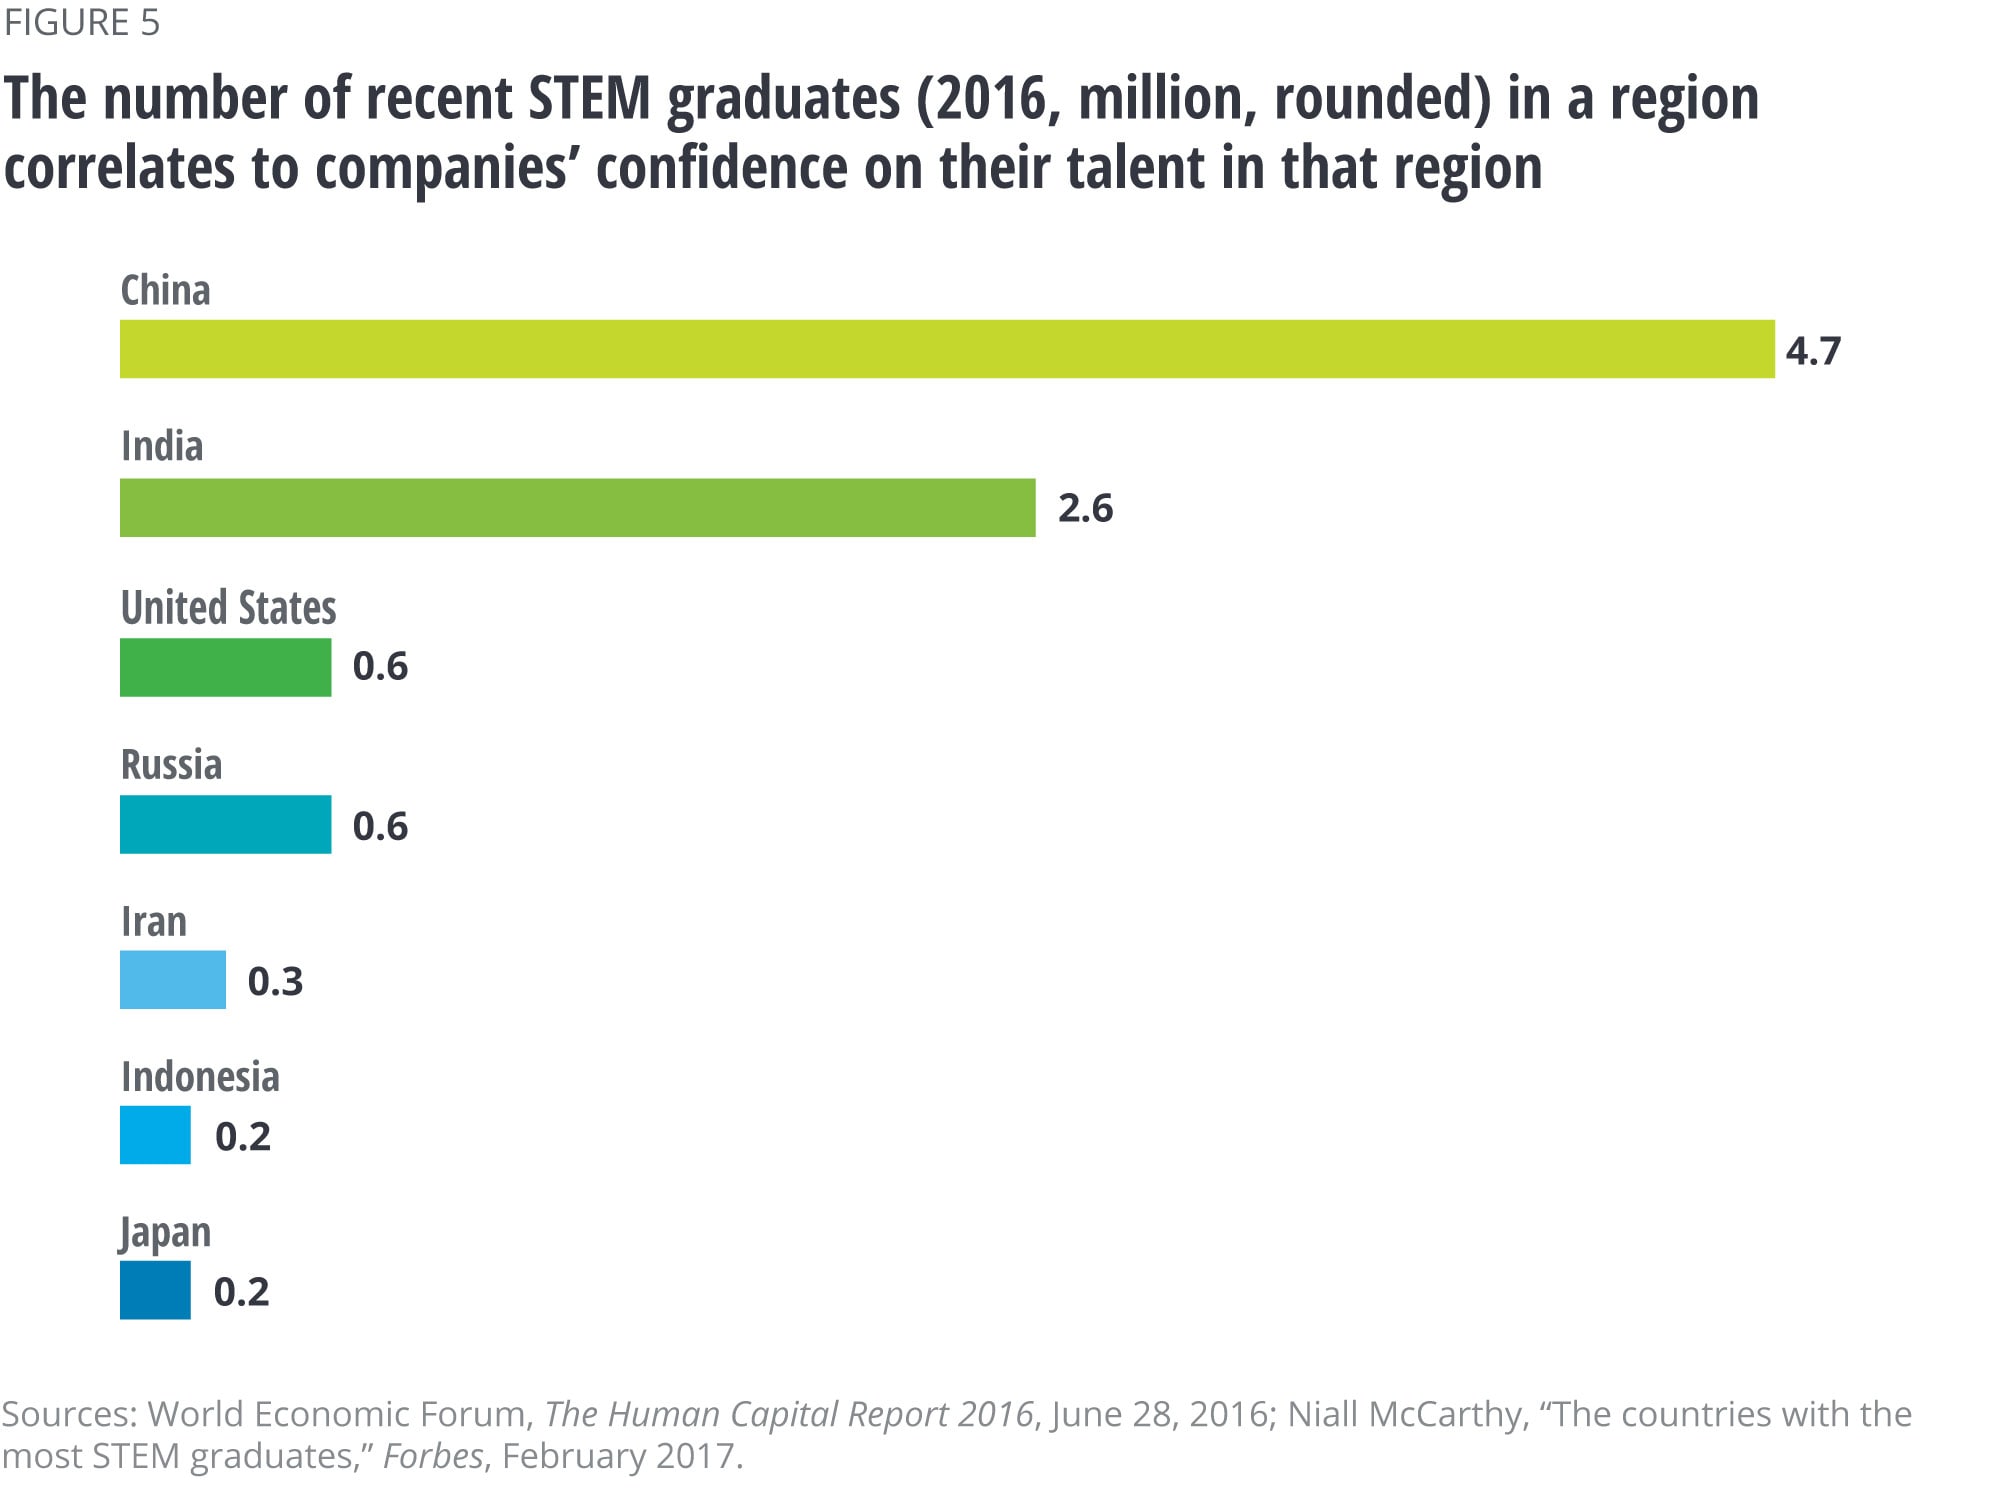 The number of recent STEM graduates (2016, million, rounded) in a region correlates to companies’ confidence on their talent in that region